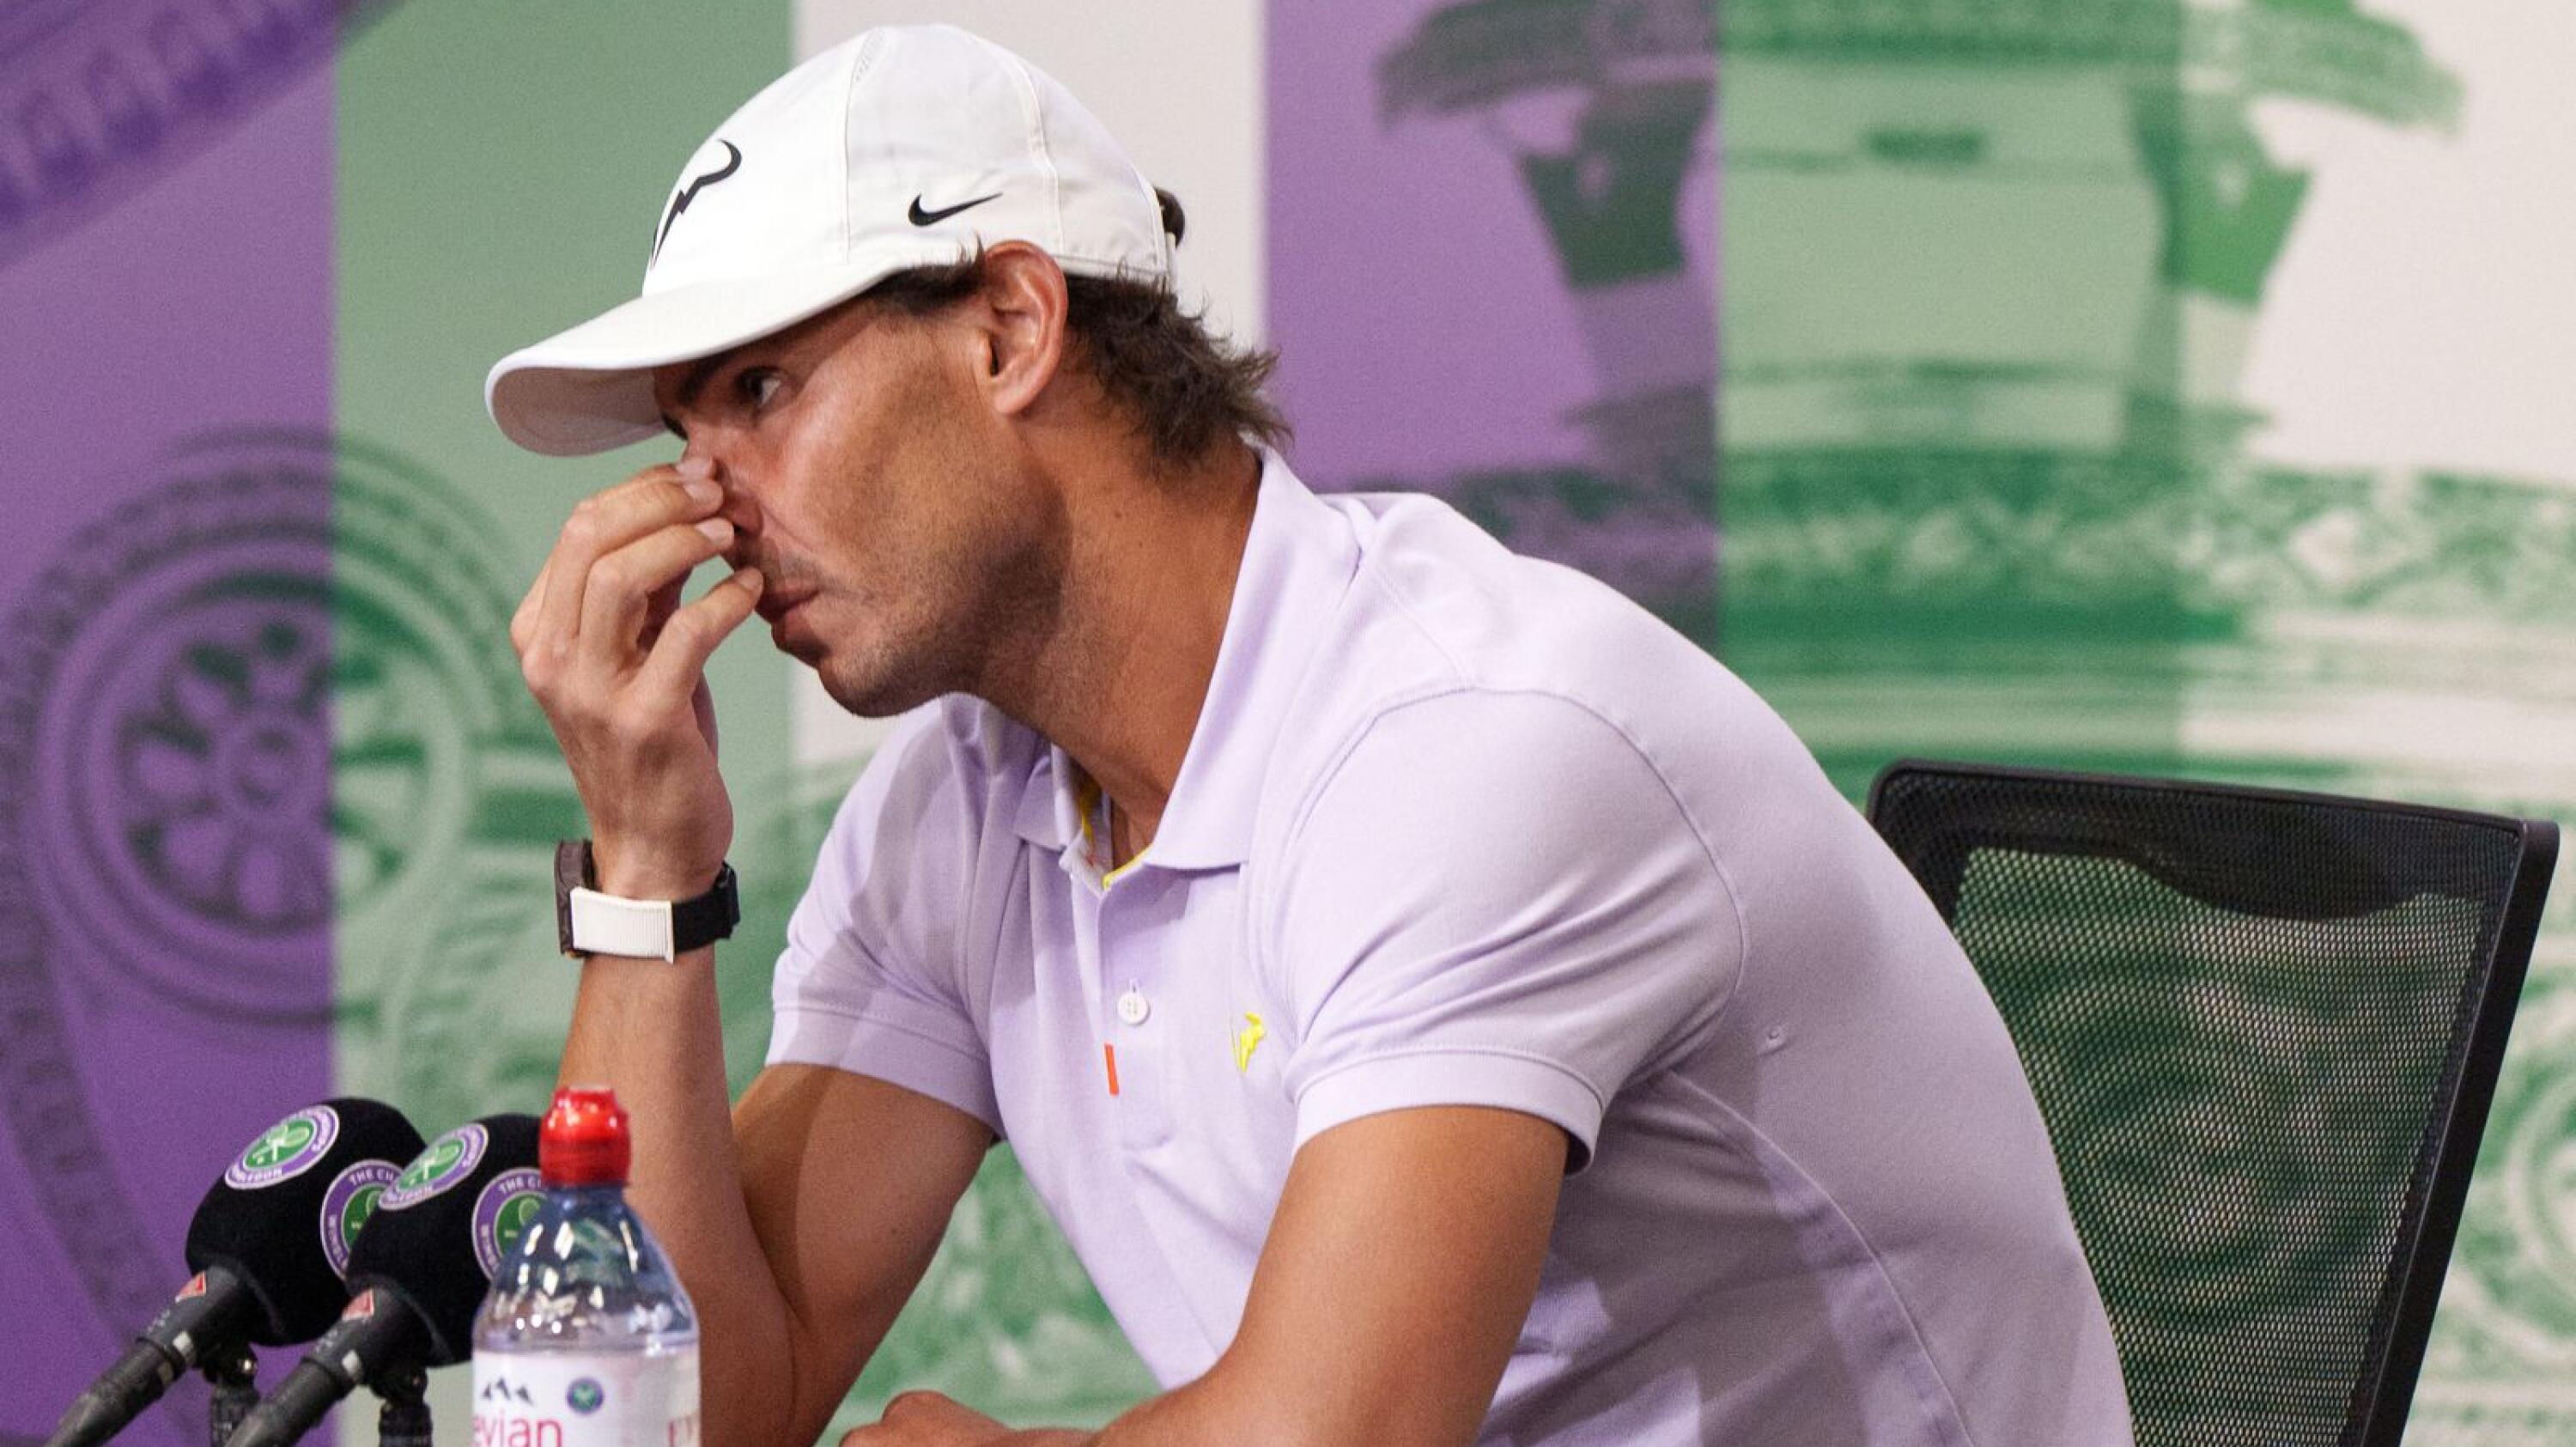 Spain's Rafael Nadal holds a press conference on the eleventh day of the 2022 Wimbledon Championships at The All England Tennis Club in Wimbledon, southwest London, on Thursday. Nadal announced on Thursdat that he was withdrawing from Wimbledon after failing to recover from an abdominal injury